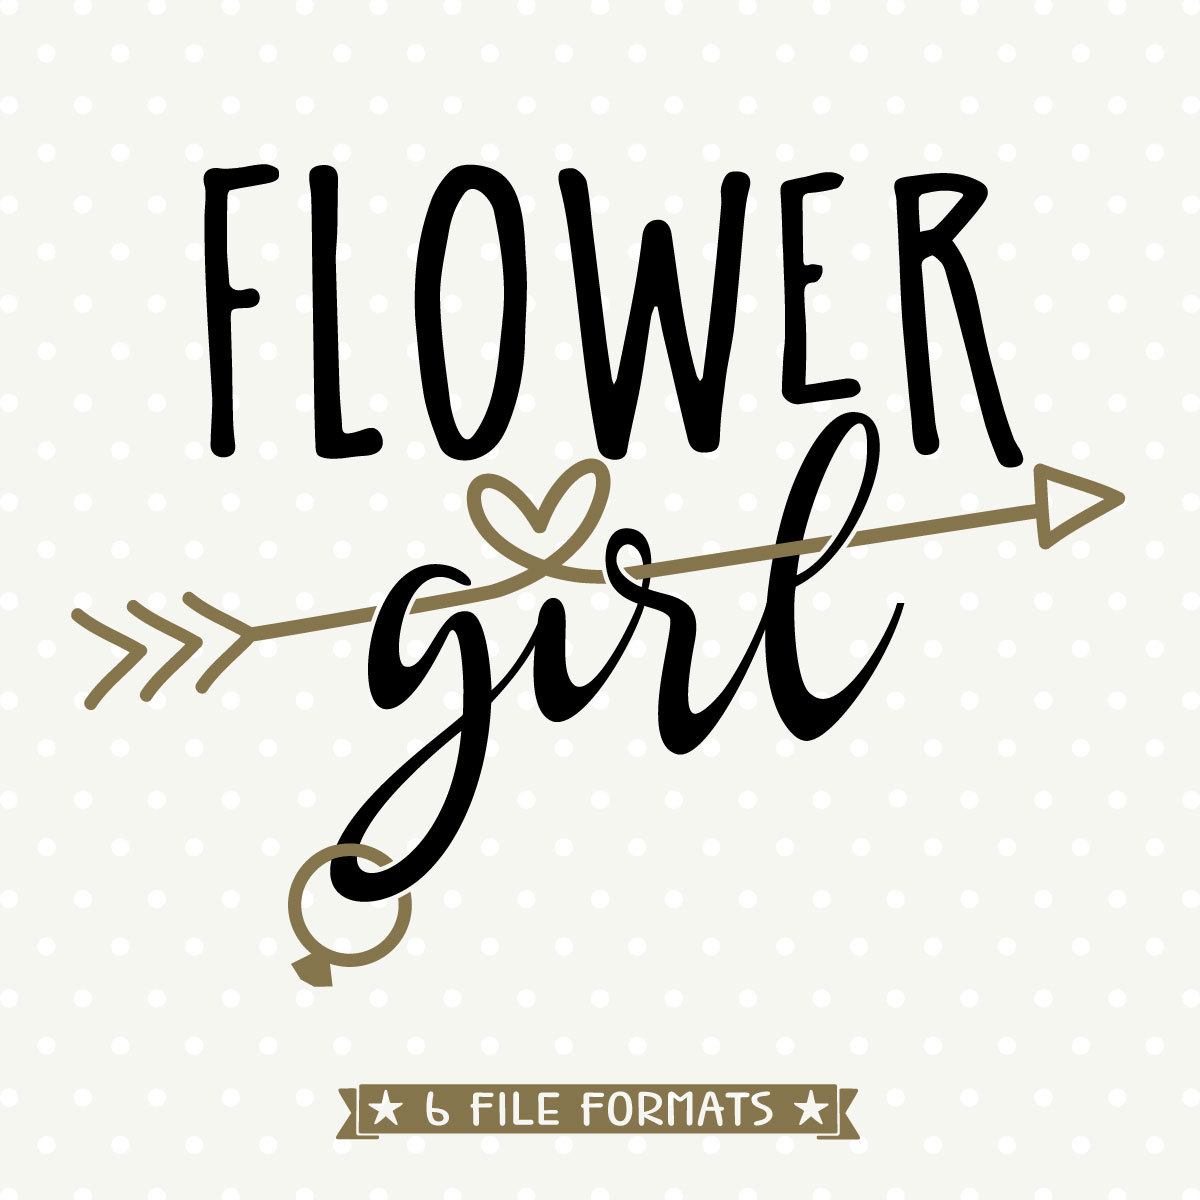 Download Flower Girl cuttable DIY Bridal Party Gifts Flower Girl SVG